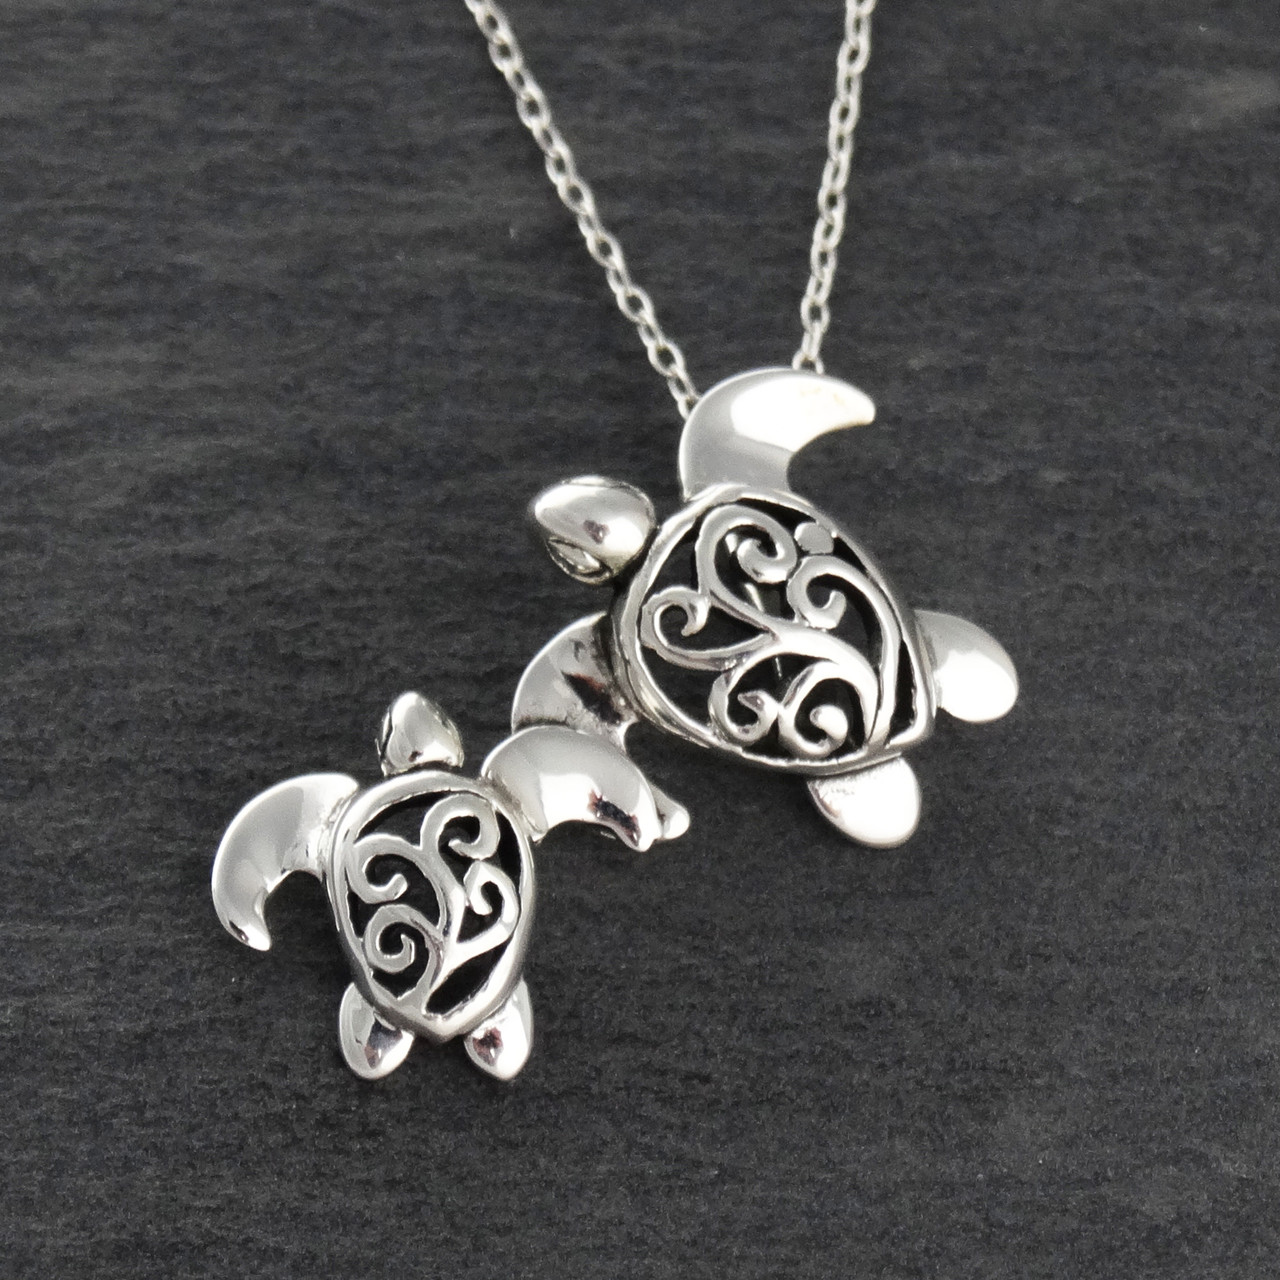 Sterling Silver 3D Sea Turtles Necklace | FashionJunkie4Life